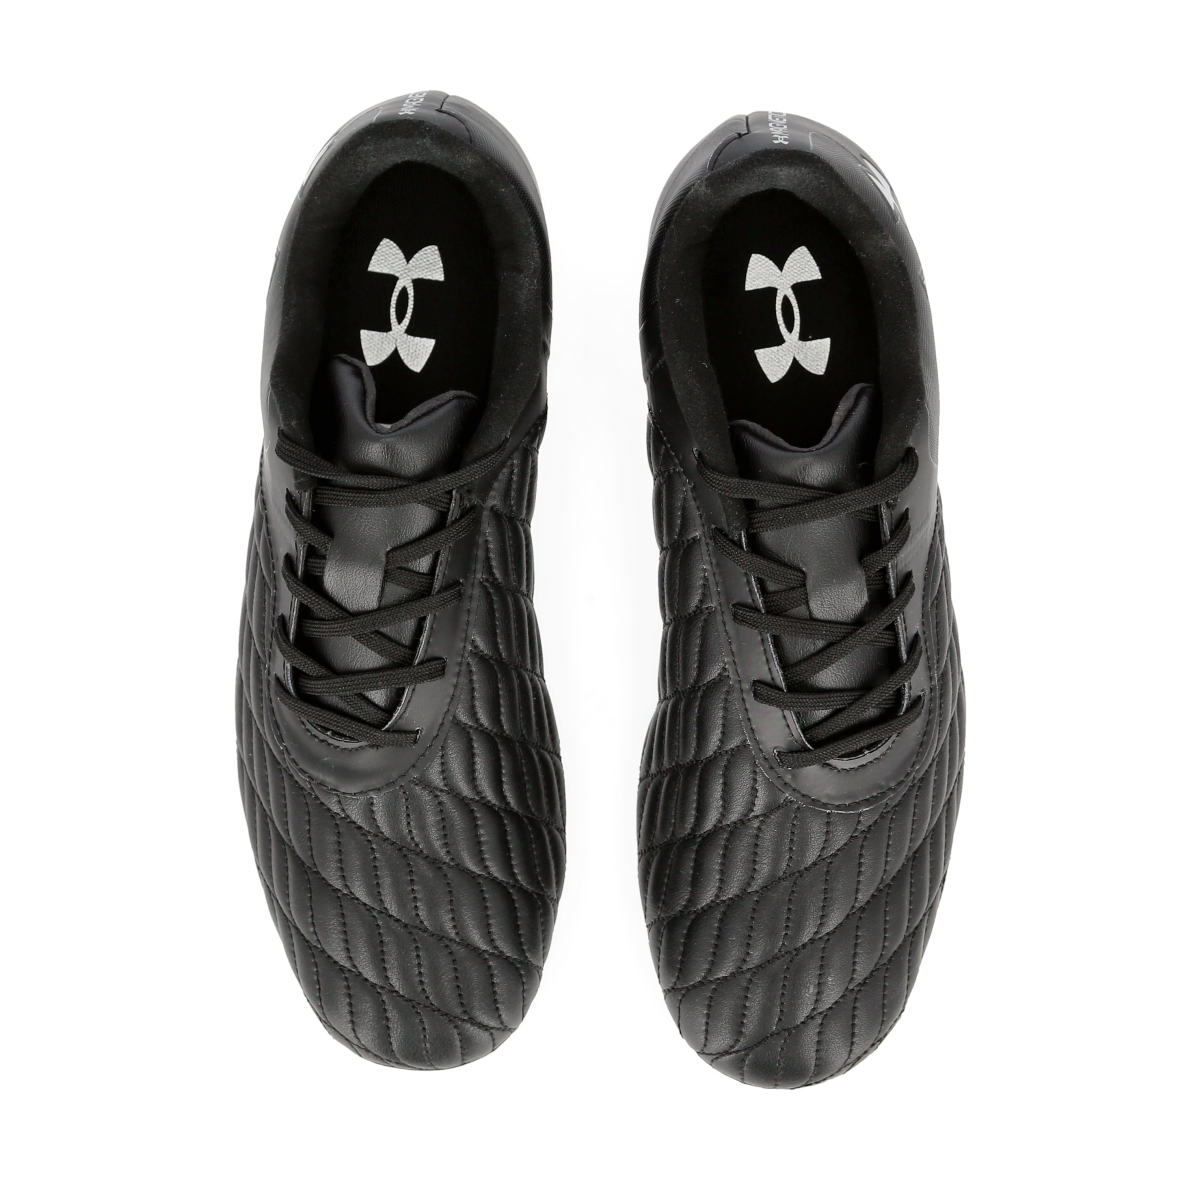 Botines Fútbol Under Armour Magnetico Select 3.0 Fg,  image number null